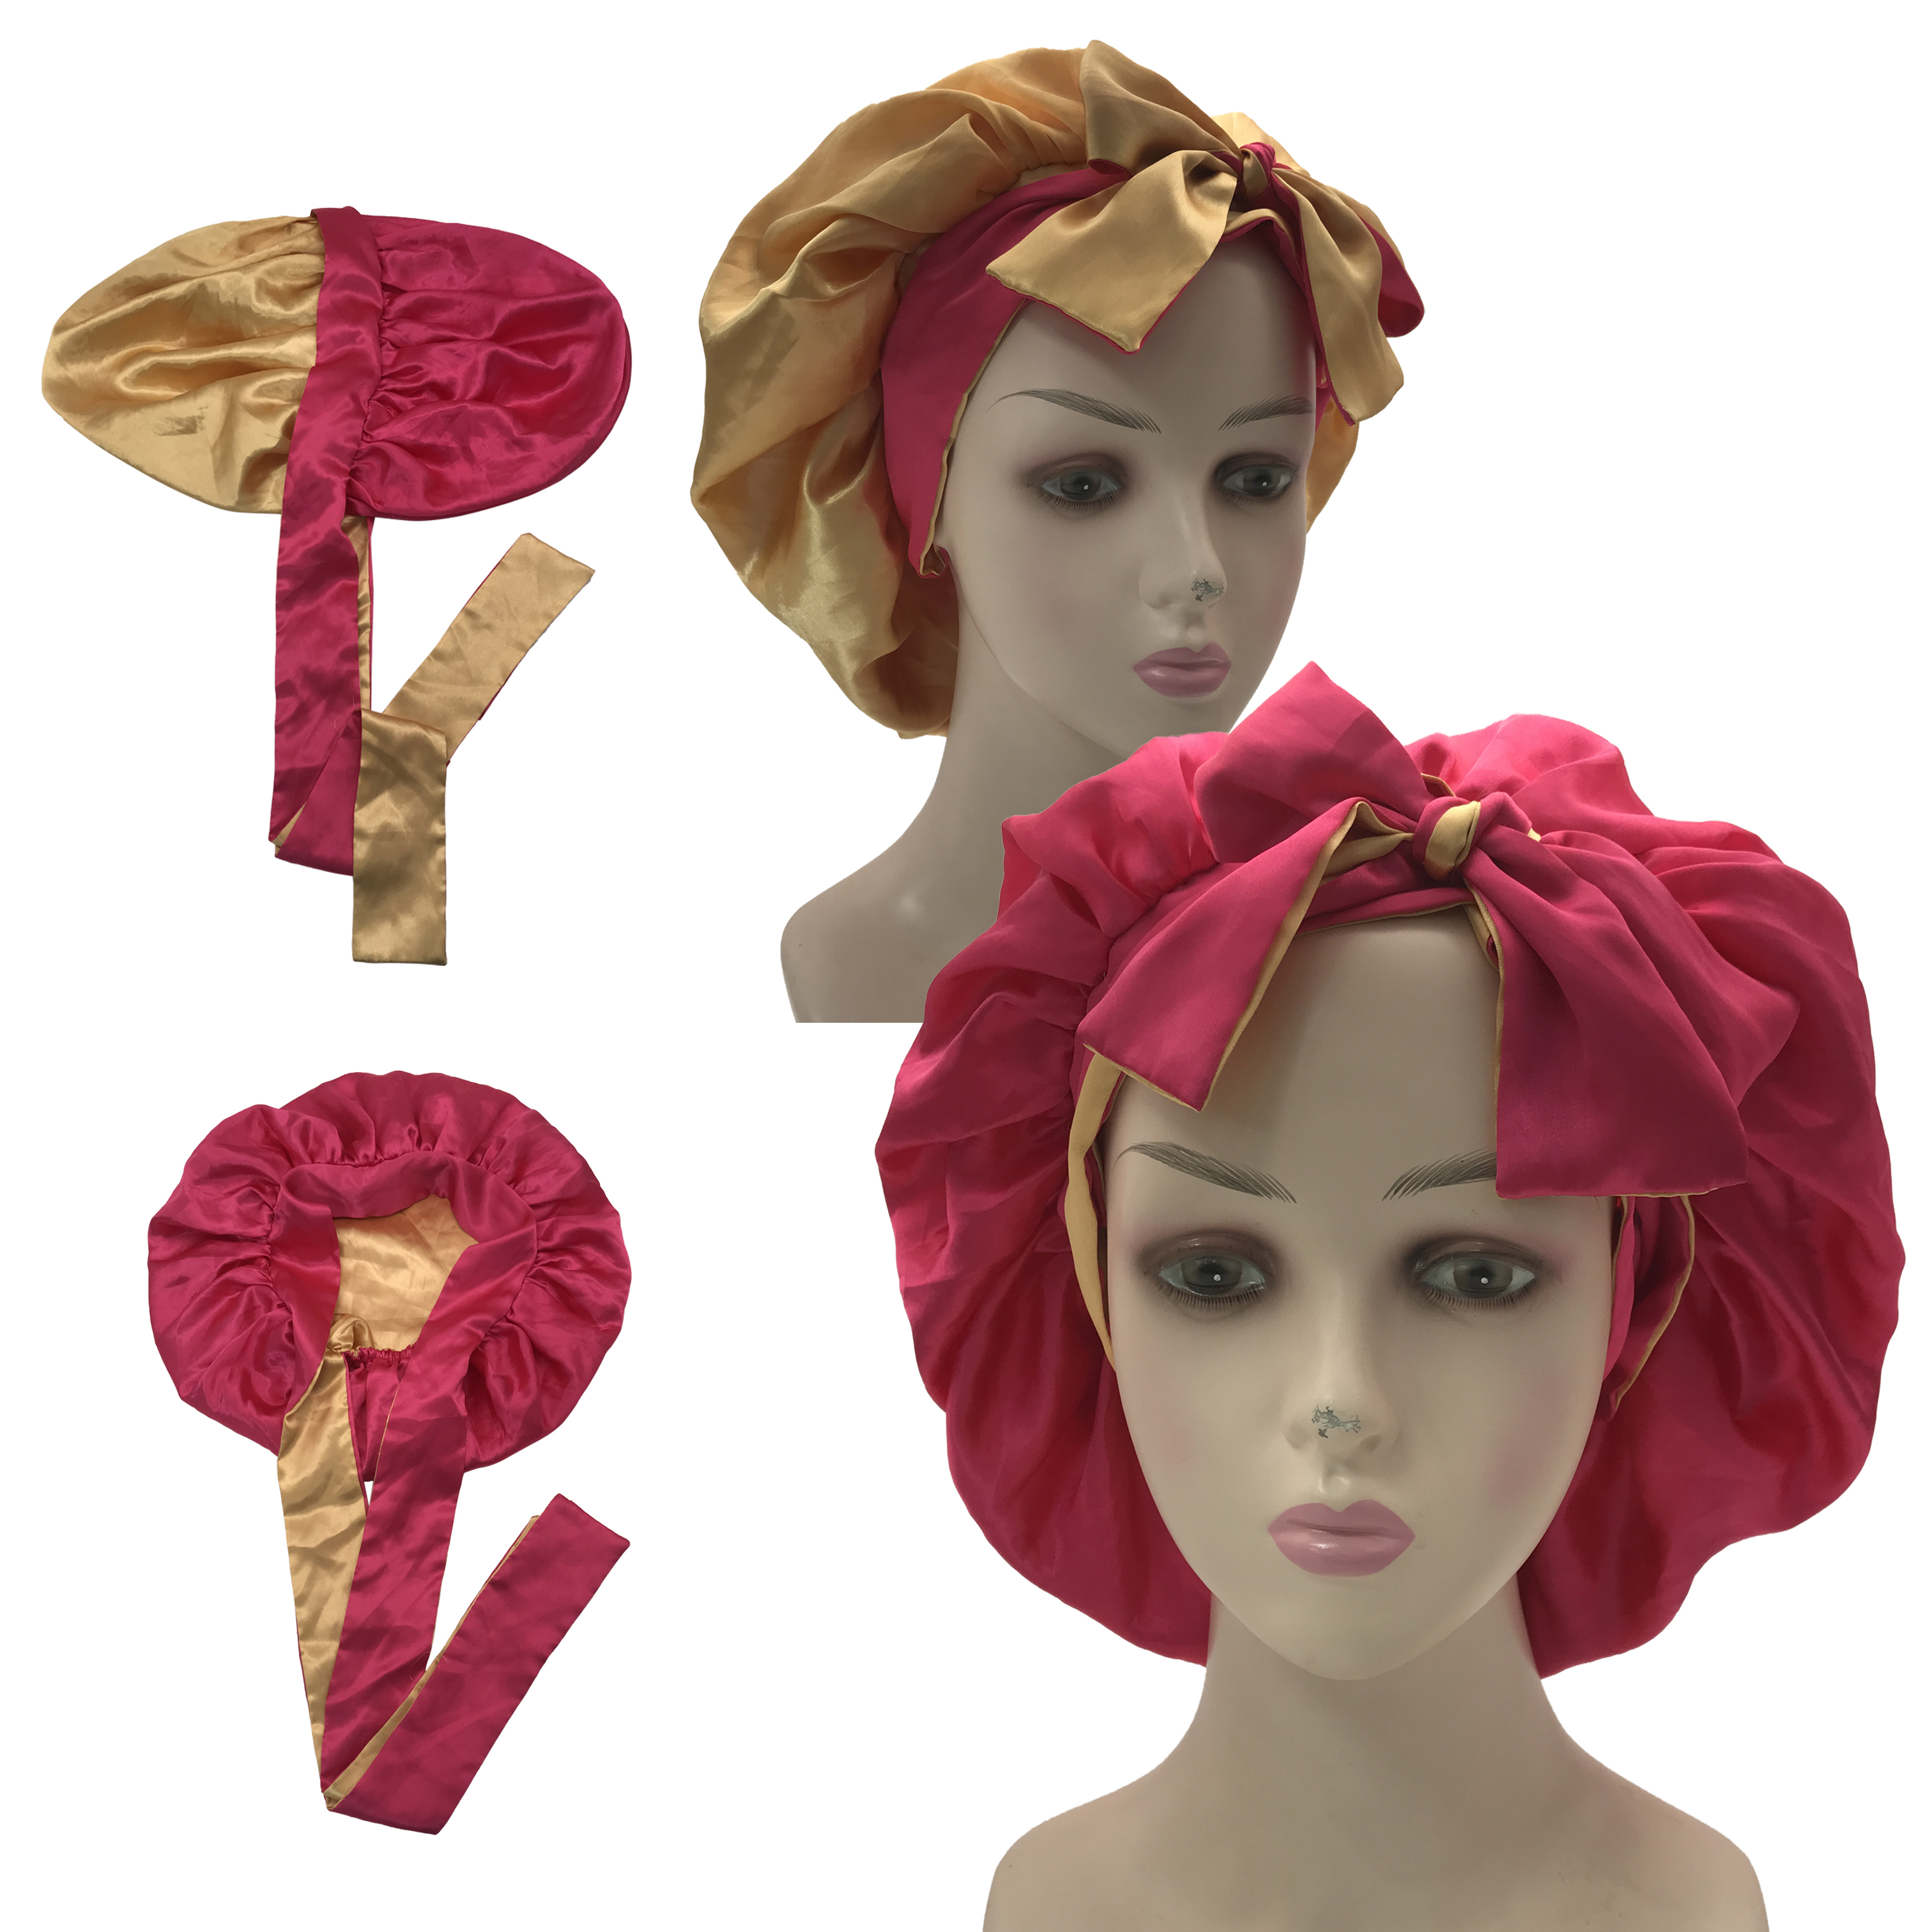 US$ 13.00 - double layer bonnet with long band no logo free